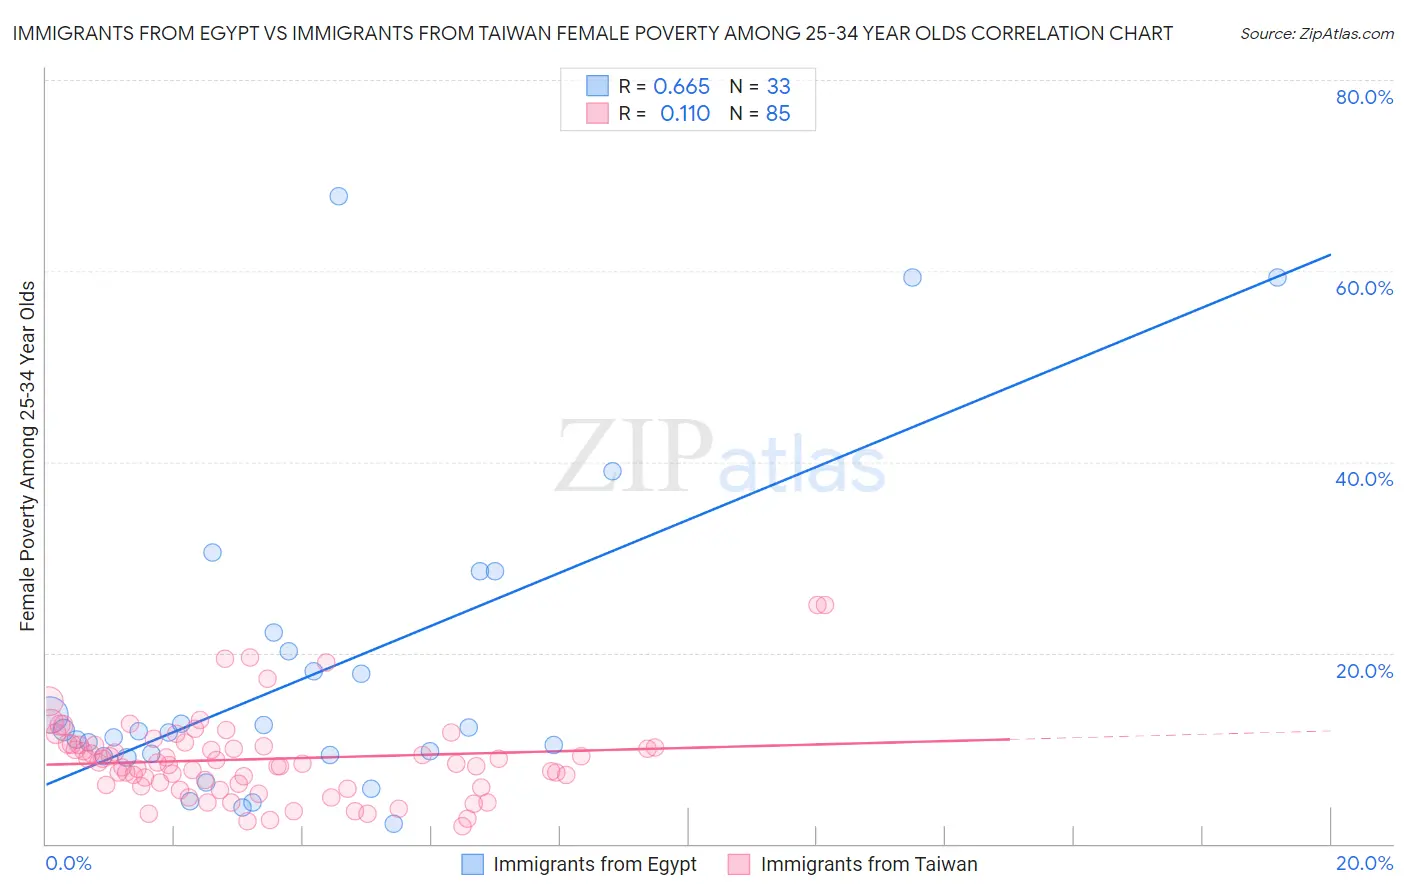 Immigrants from Egypt vs Immigrants from Taiwan Female Poverty Among 25-34 Year Olds